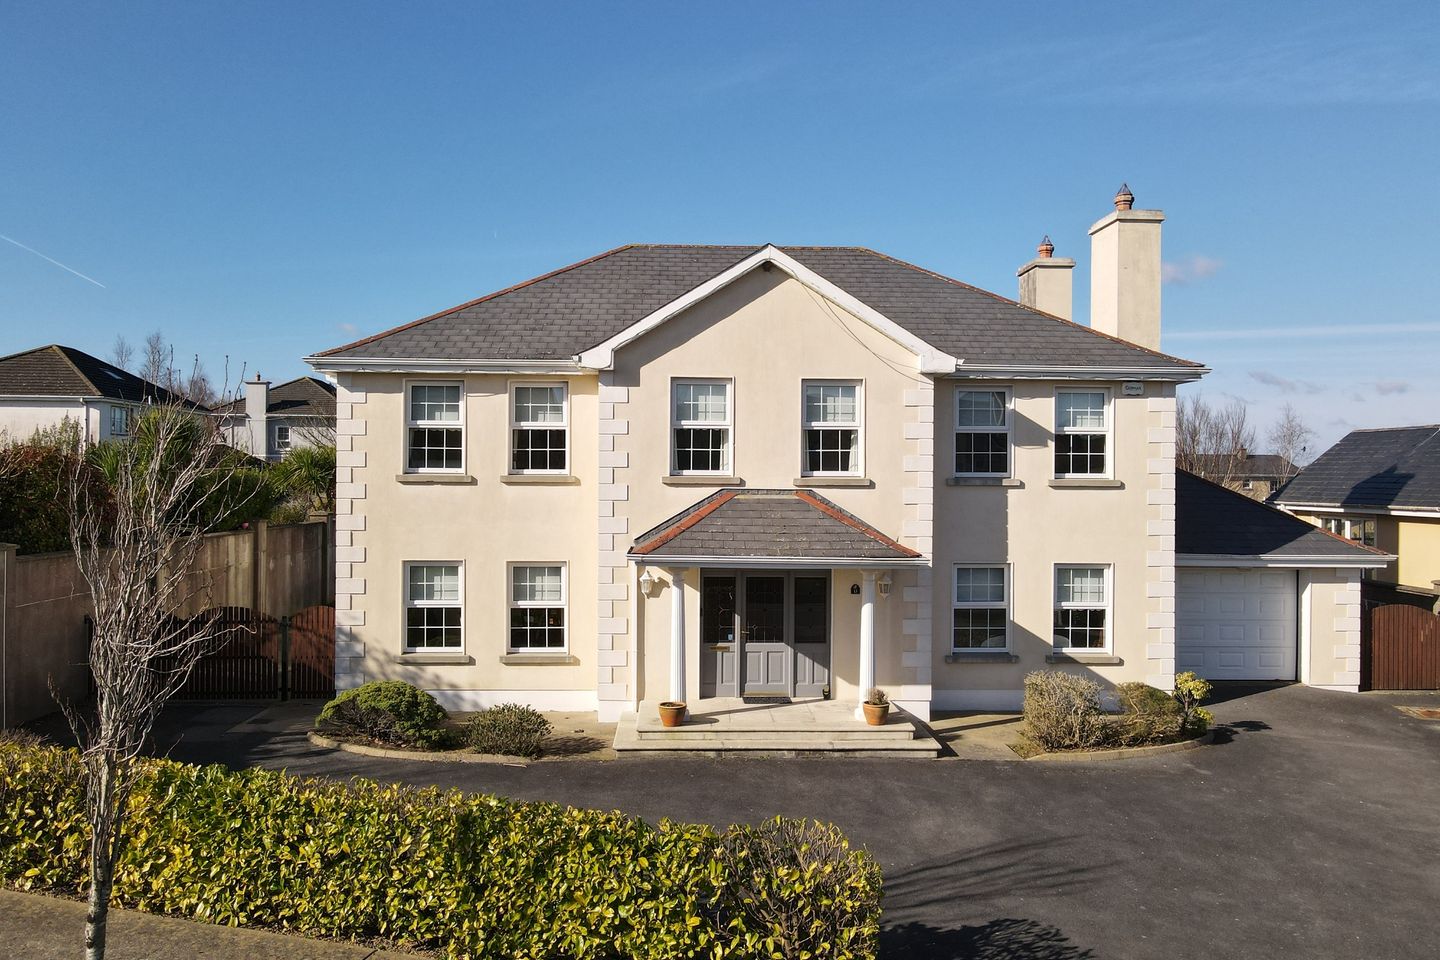 13 The Village, Ballygunner, Waterford City, Co. Waterford